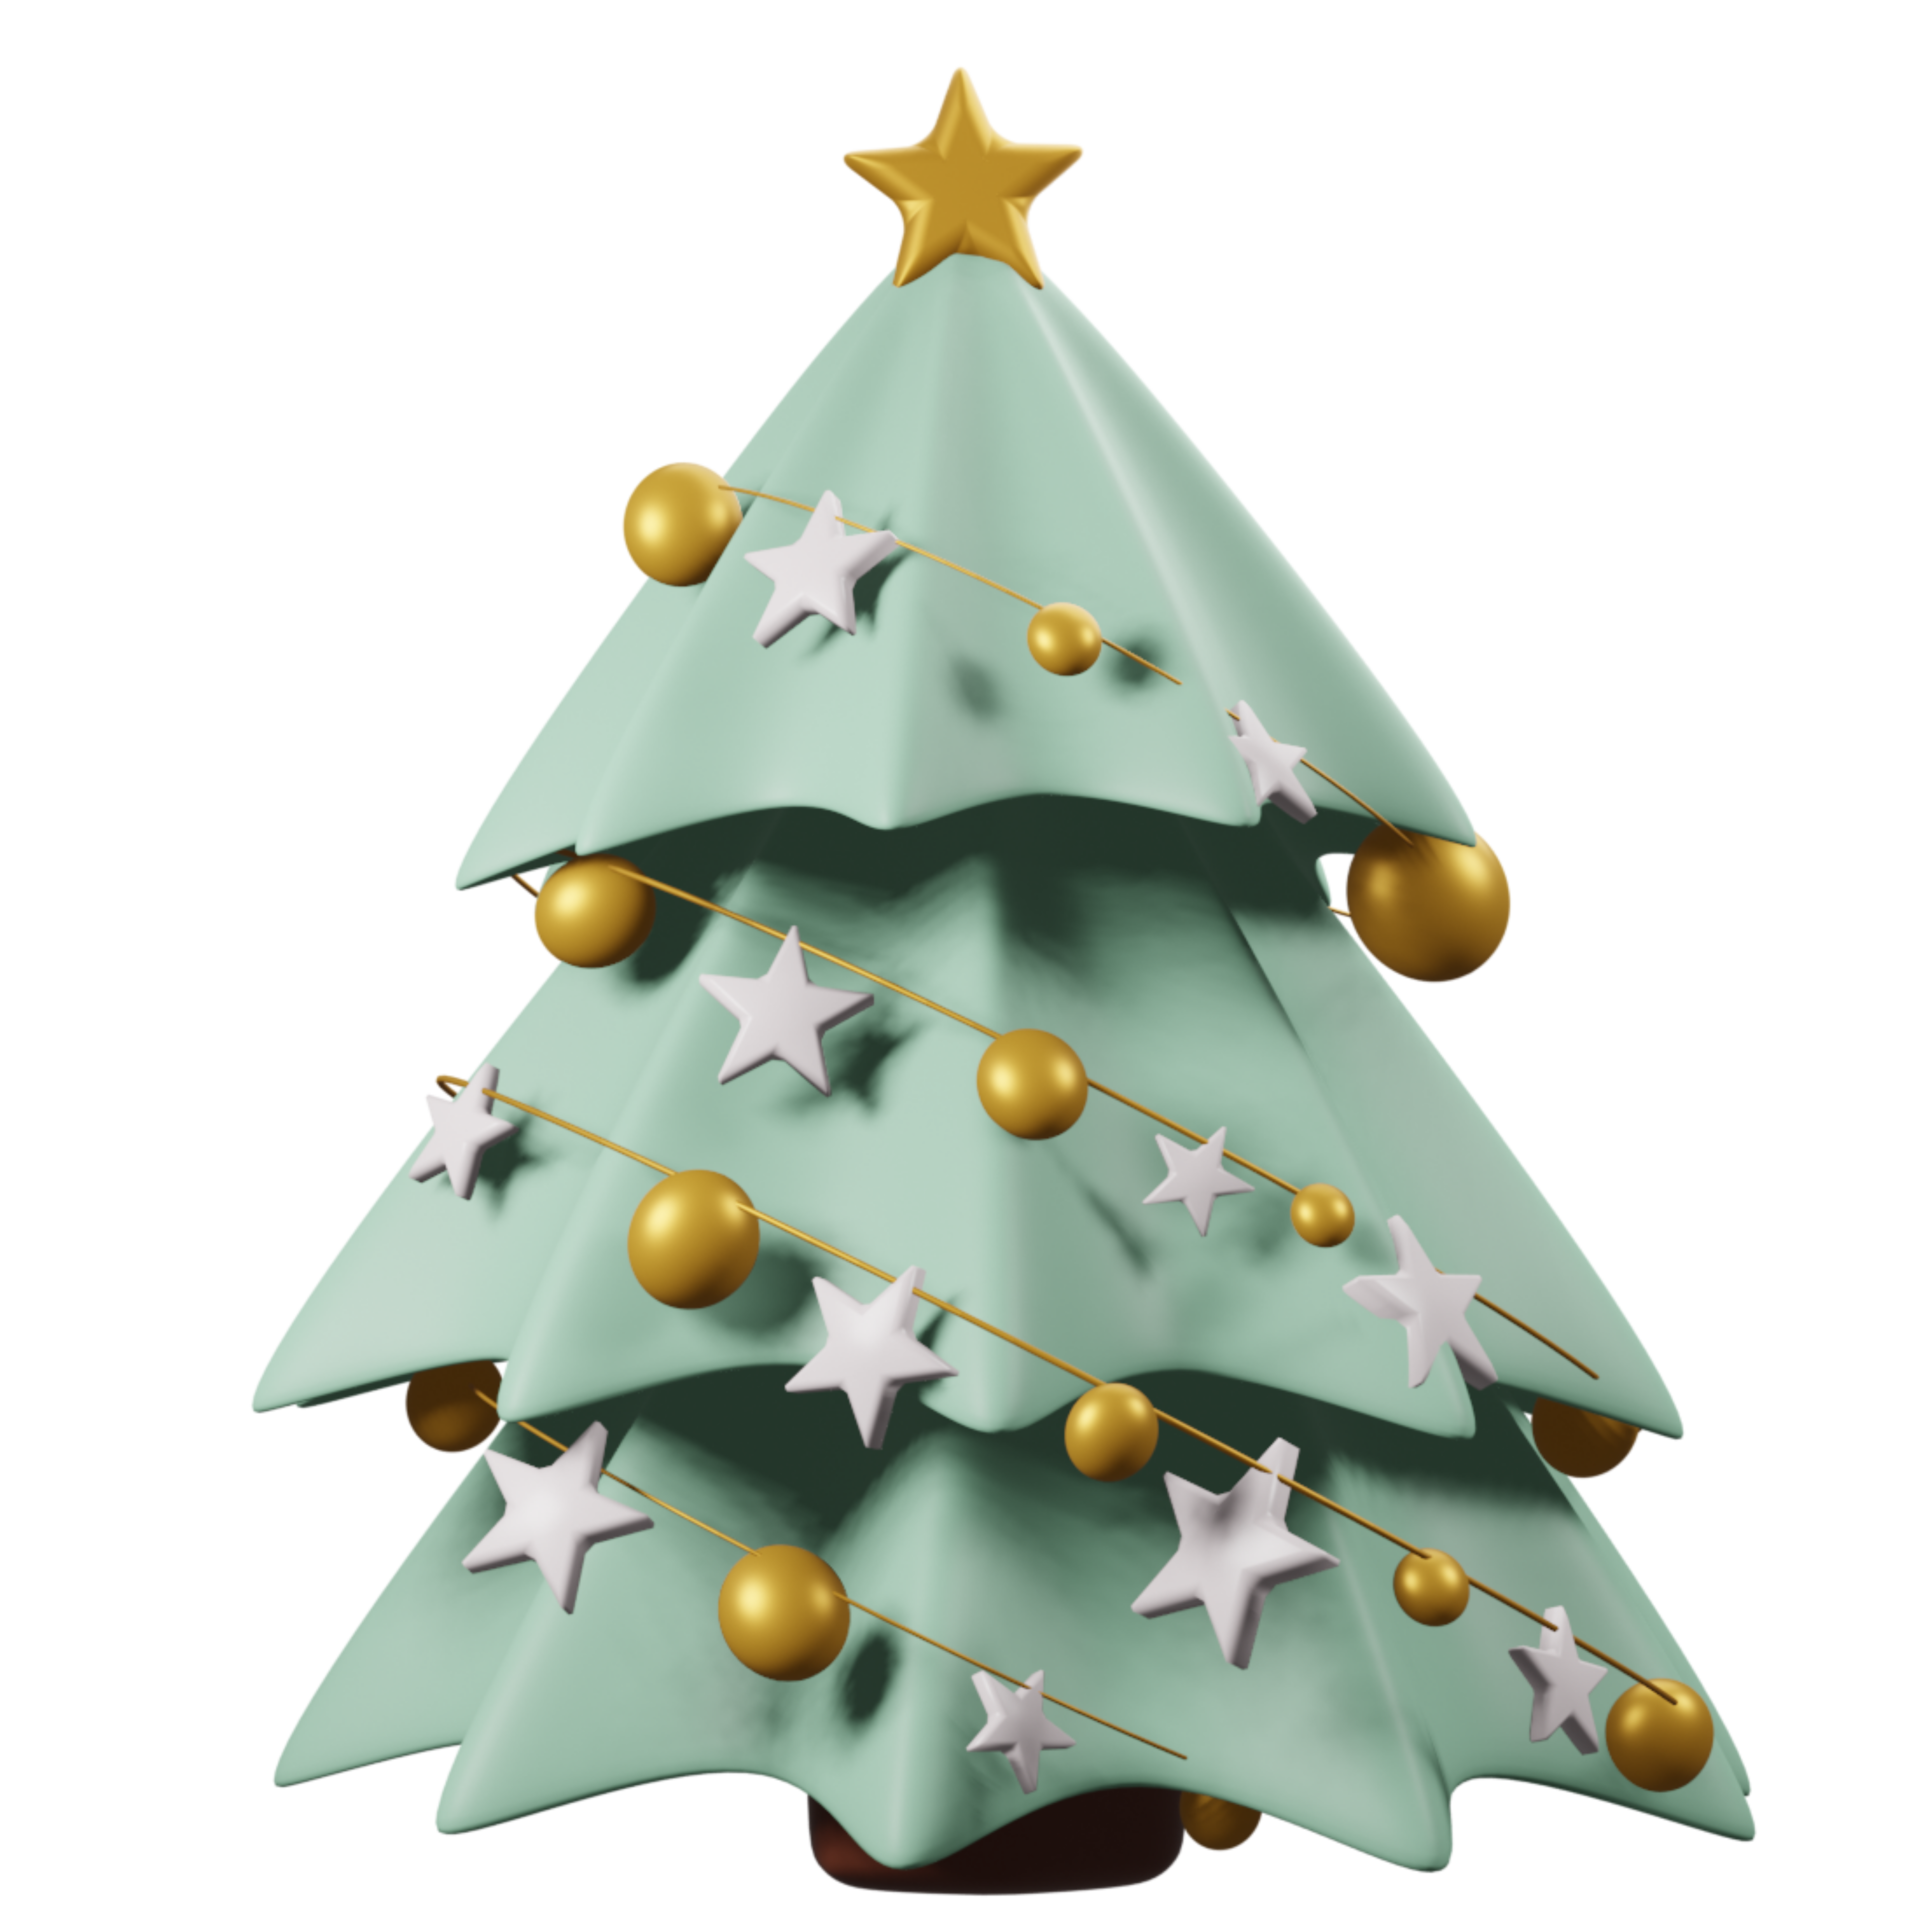 Free 3D Christmas Ornament 13125456 PNG with Transparent Background